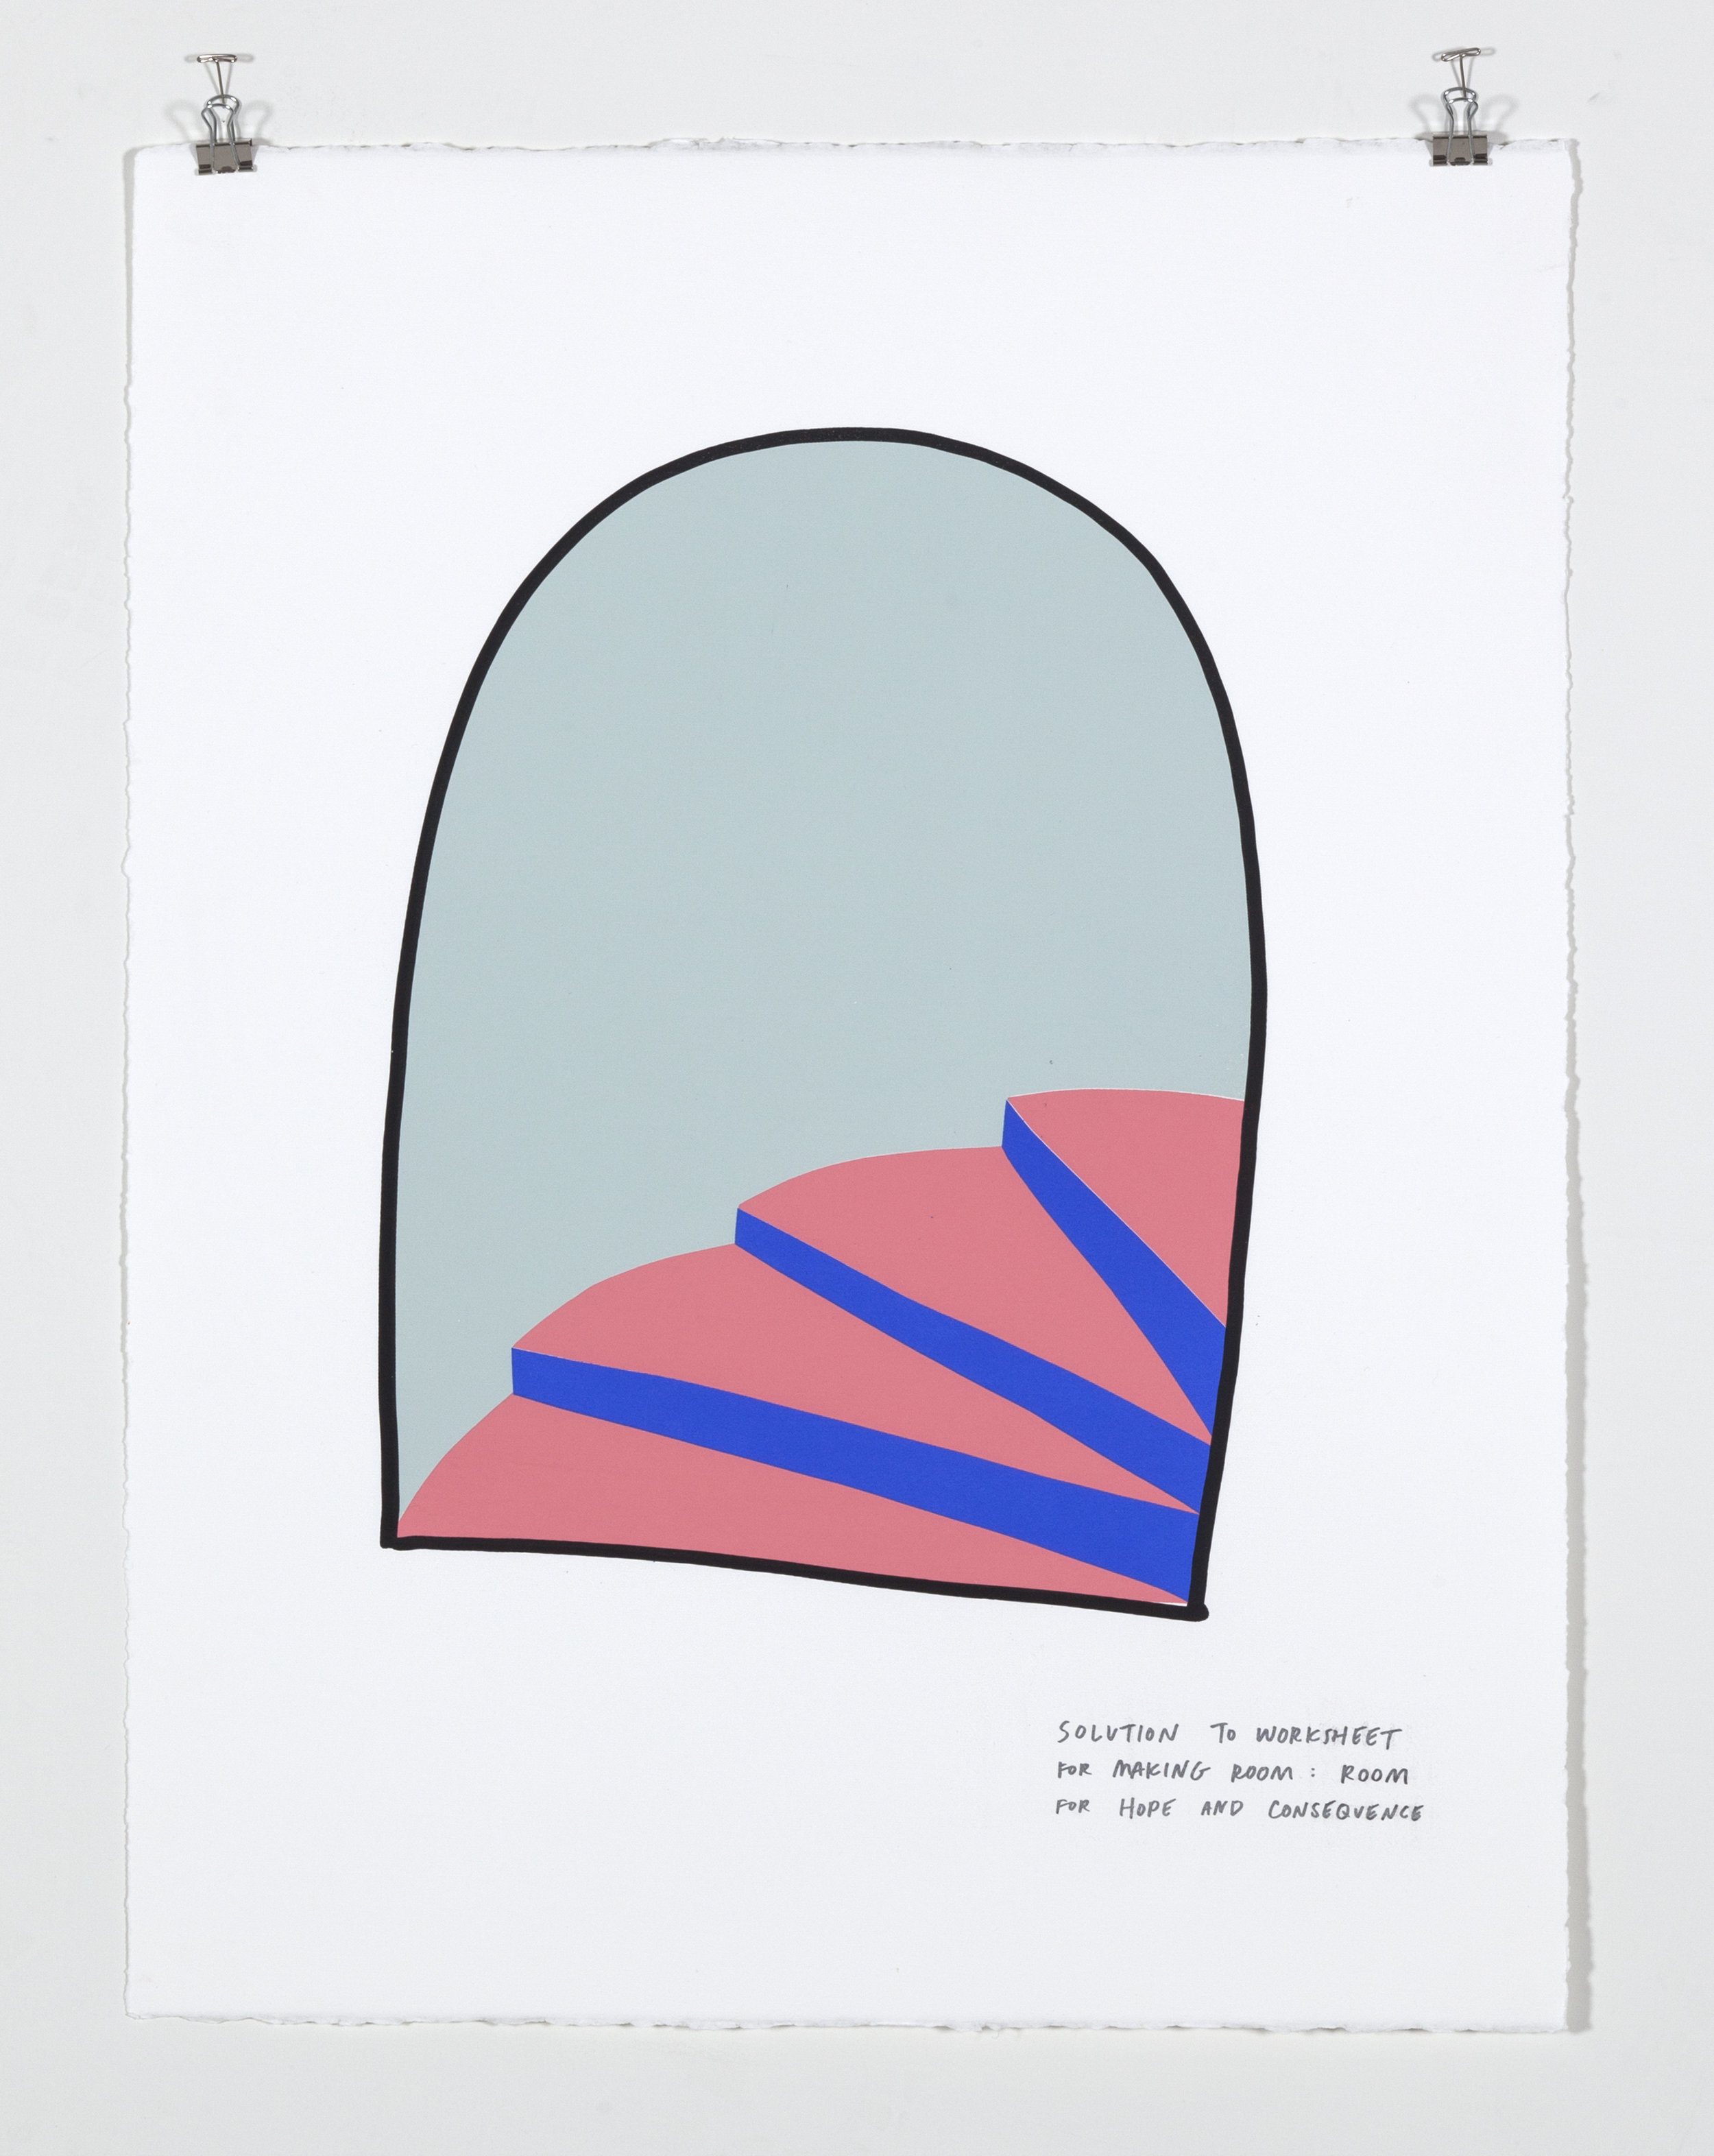    Solution to Worksheet for Making Room: Room of Hope and Consequence,  2018  Five color silkscreen print on paper 19 7/8 x 25 7/8 inches 